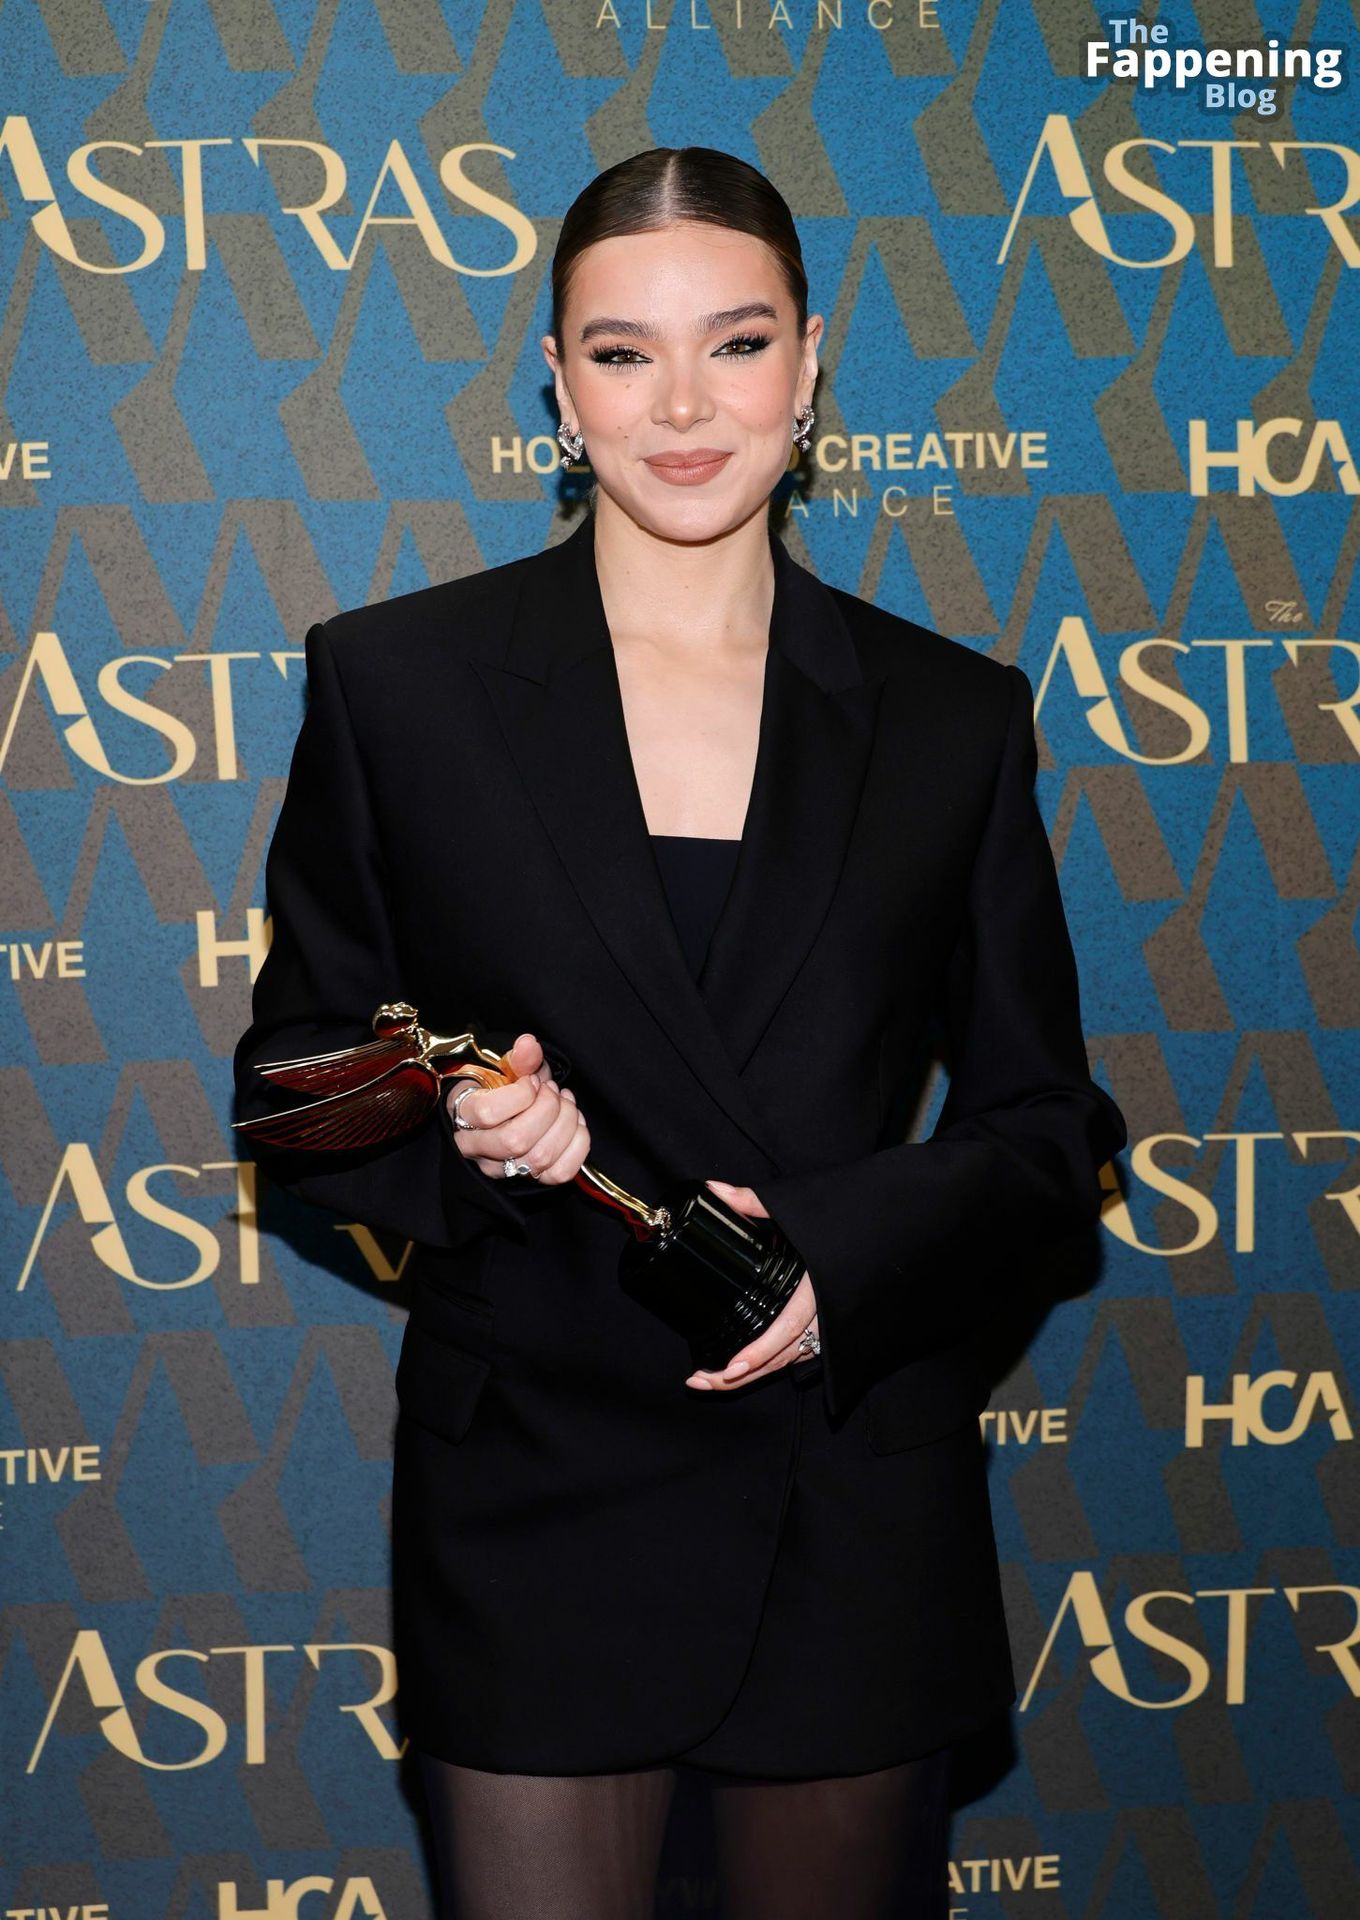 Hailee-Steinfeld-Black-Outfit-Astra-Film-Awards-13-thefappeningblog.com_.jpg